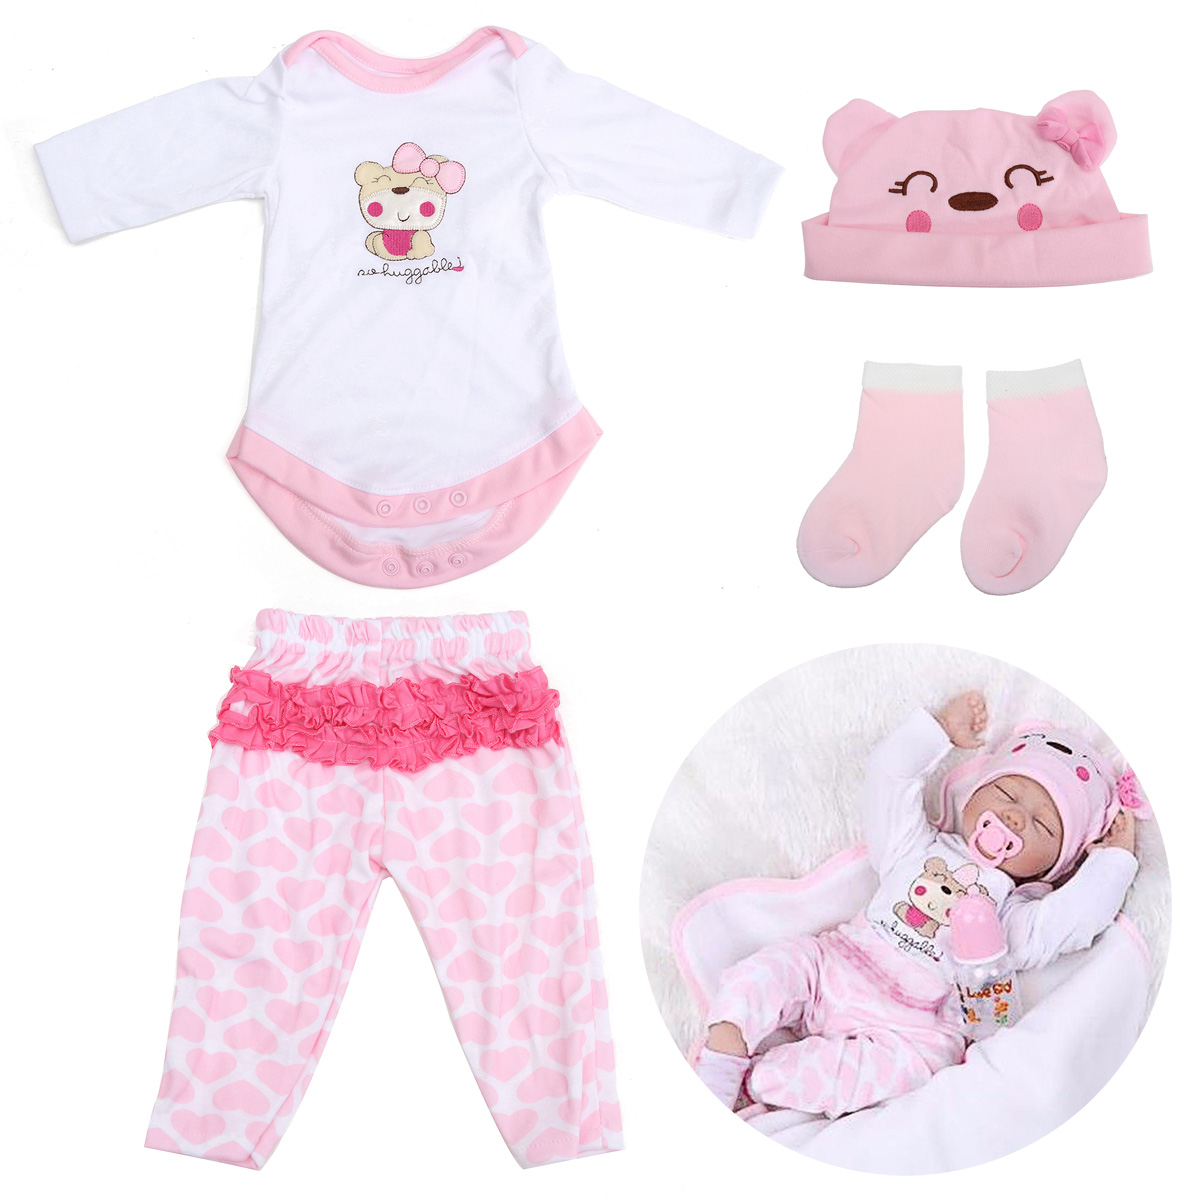 Pink-Doll-Clothes-Set-For-22inch-Reborn-Baby-Doll-1156778